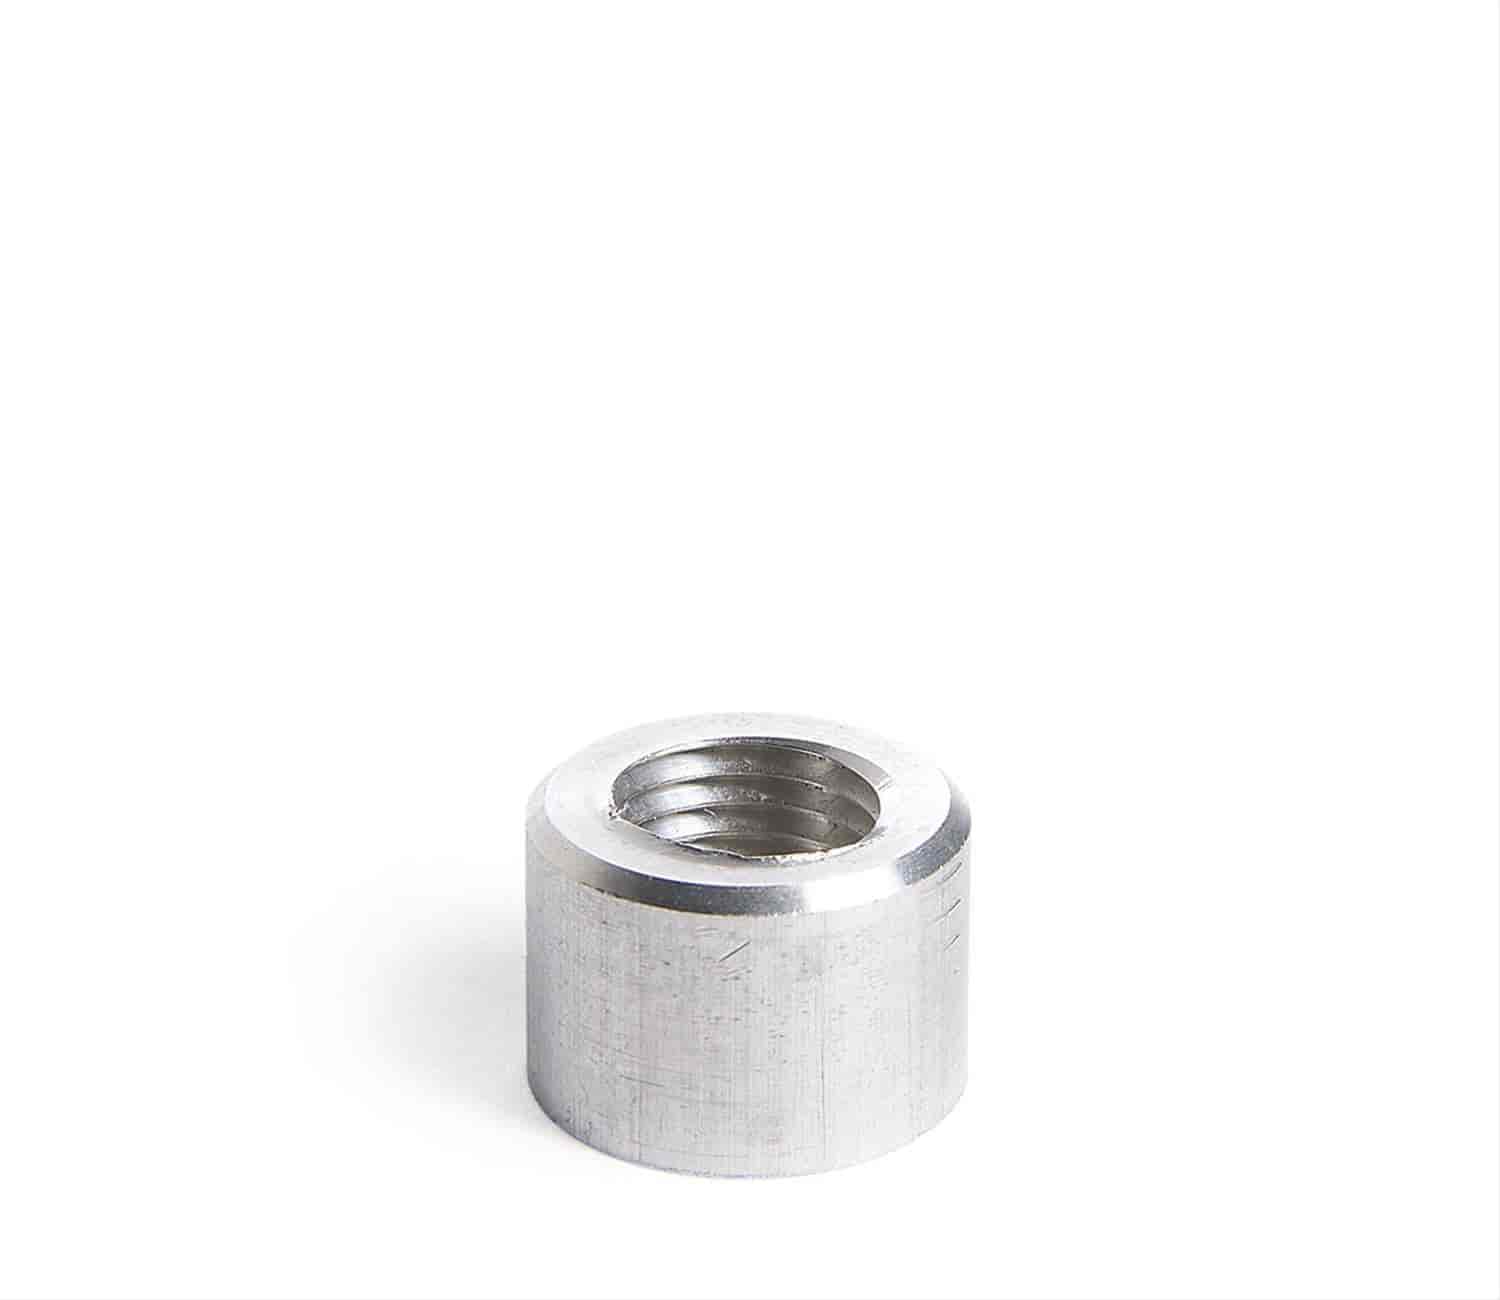 Aluminum Weld-In Bung Fitting 1/4" NPT Female Fitting